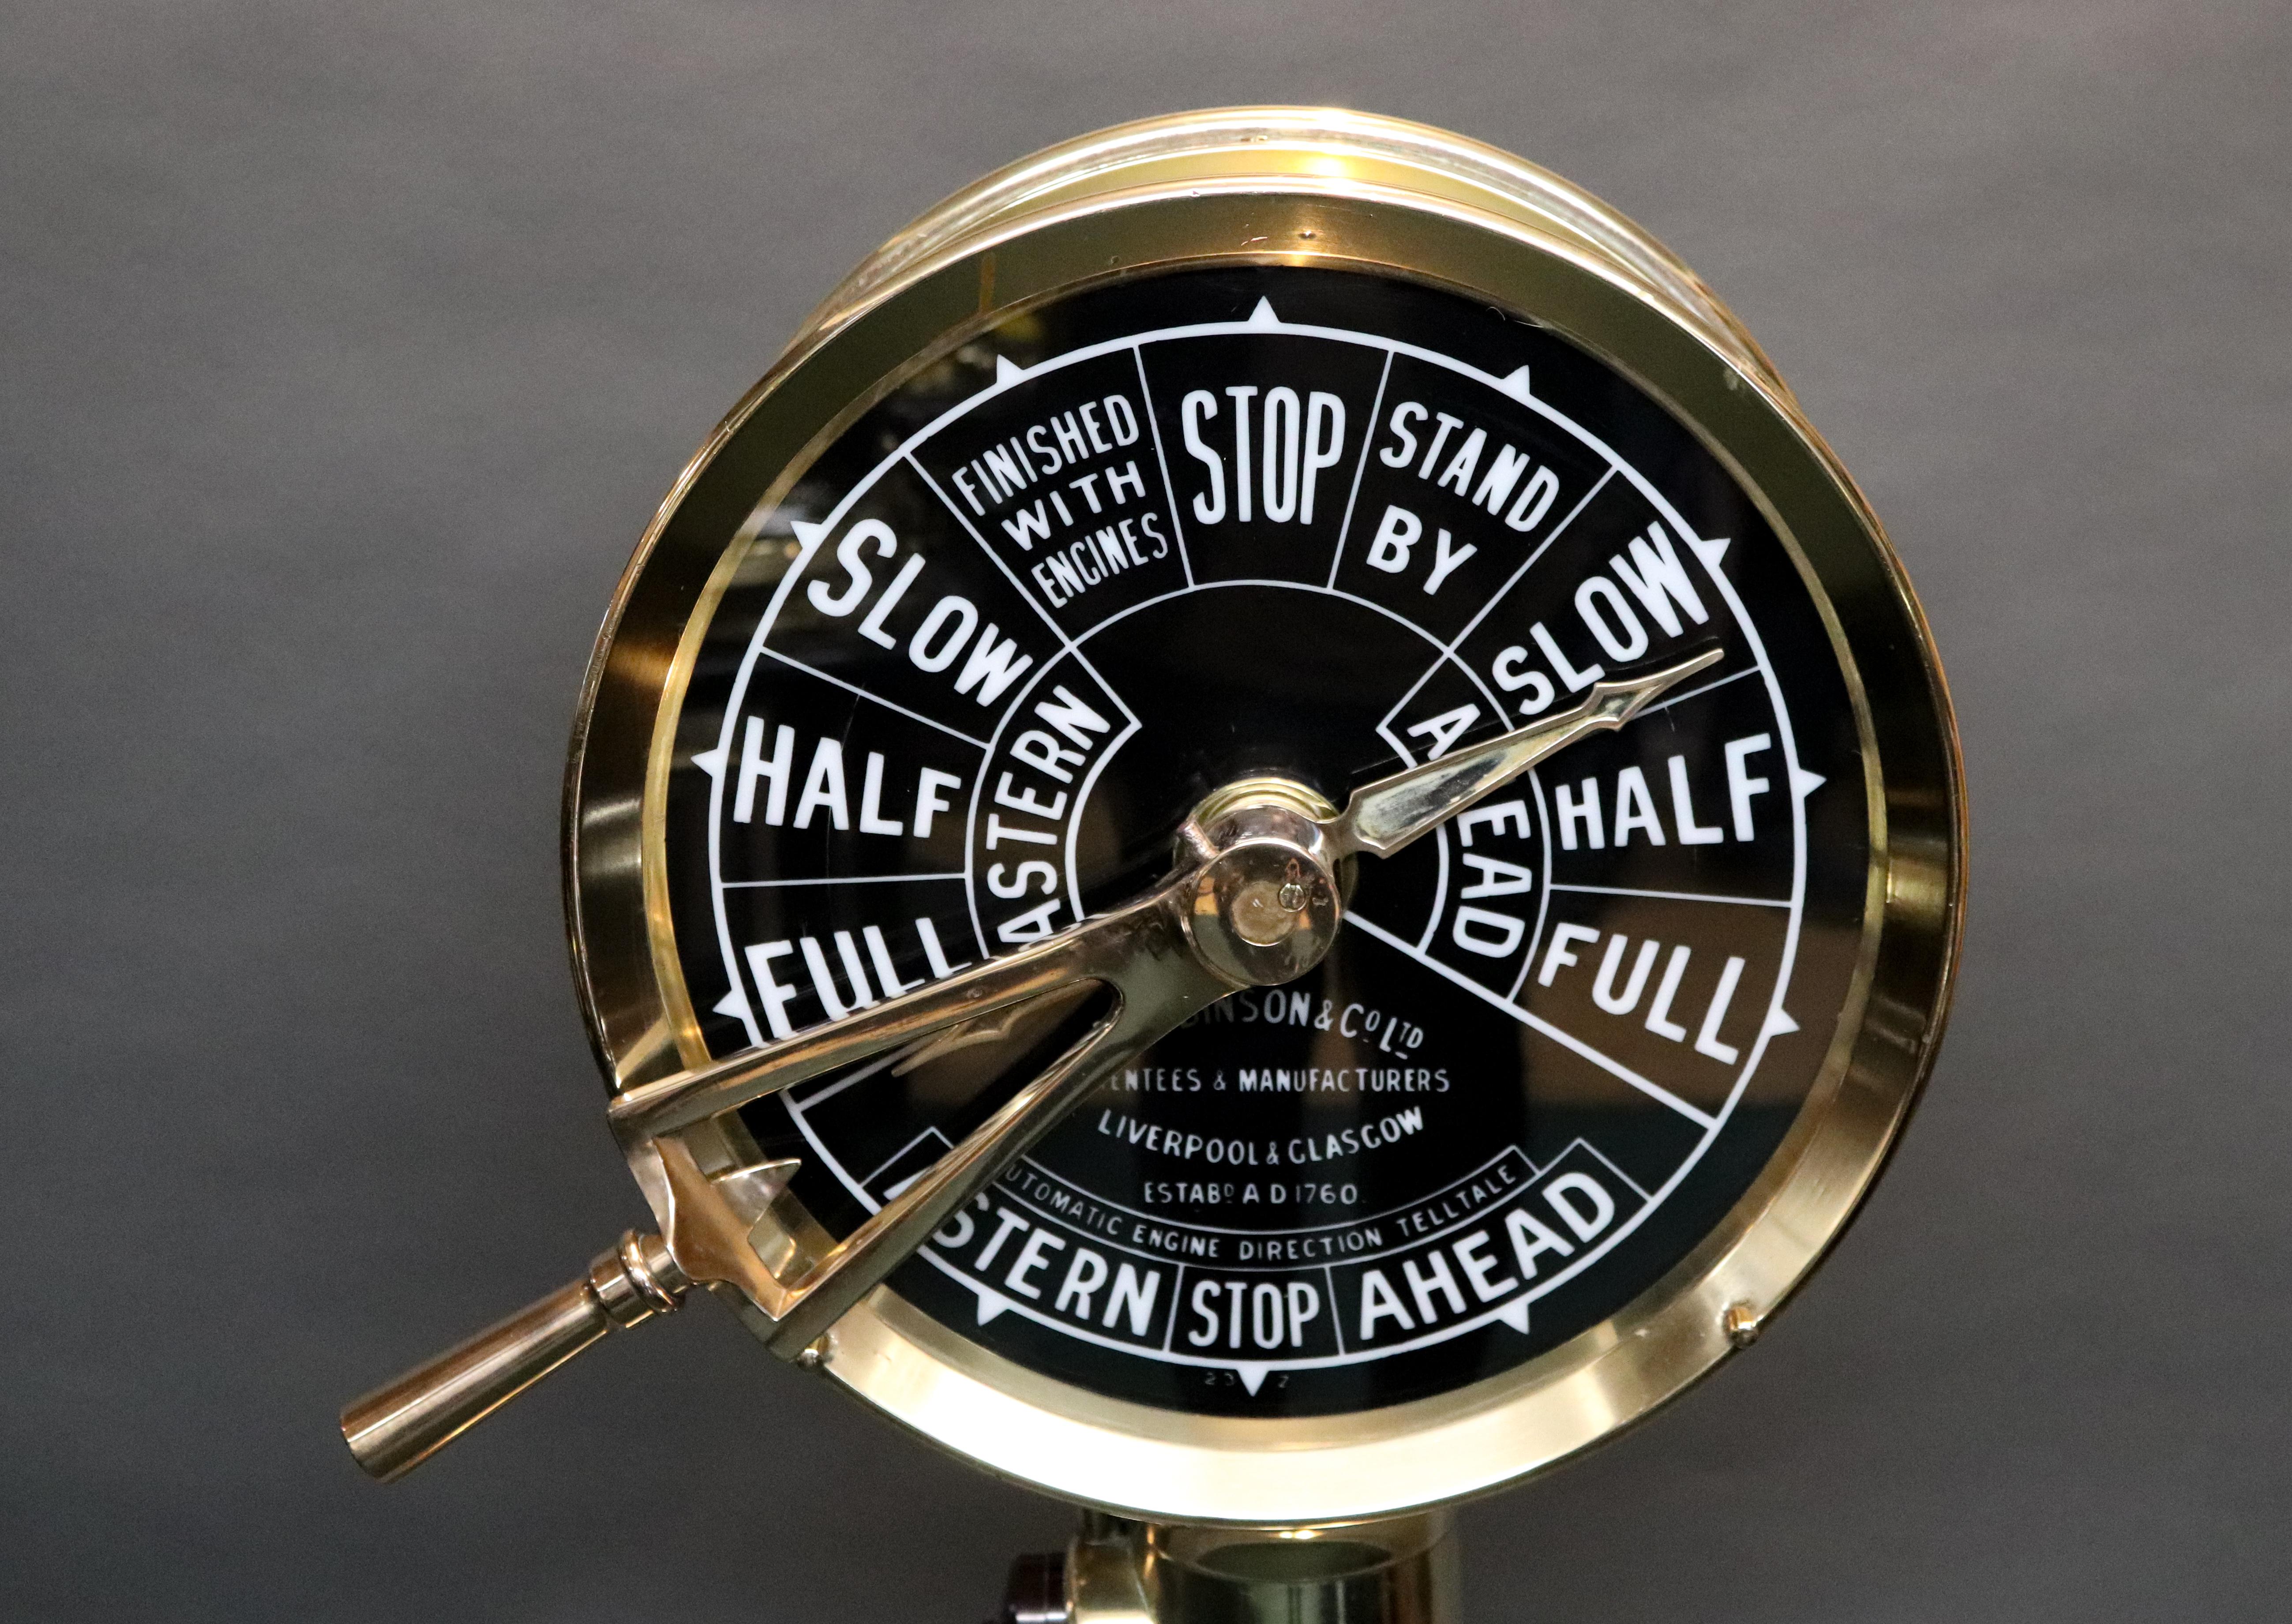 Solid brass engine order telegraph by A. Robinson of Liverpool and Glasgow. Faceplate has full ahead and astern commands. 51